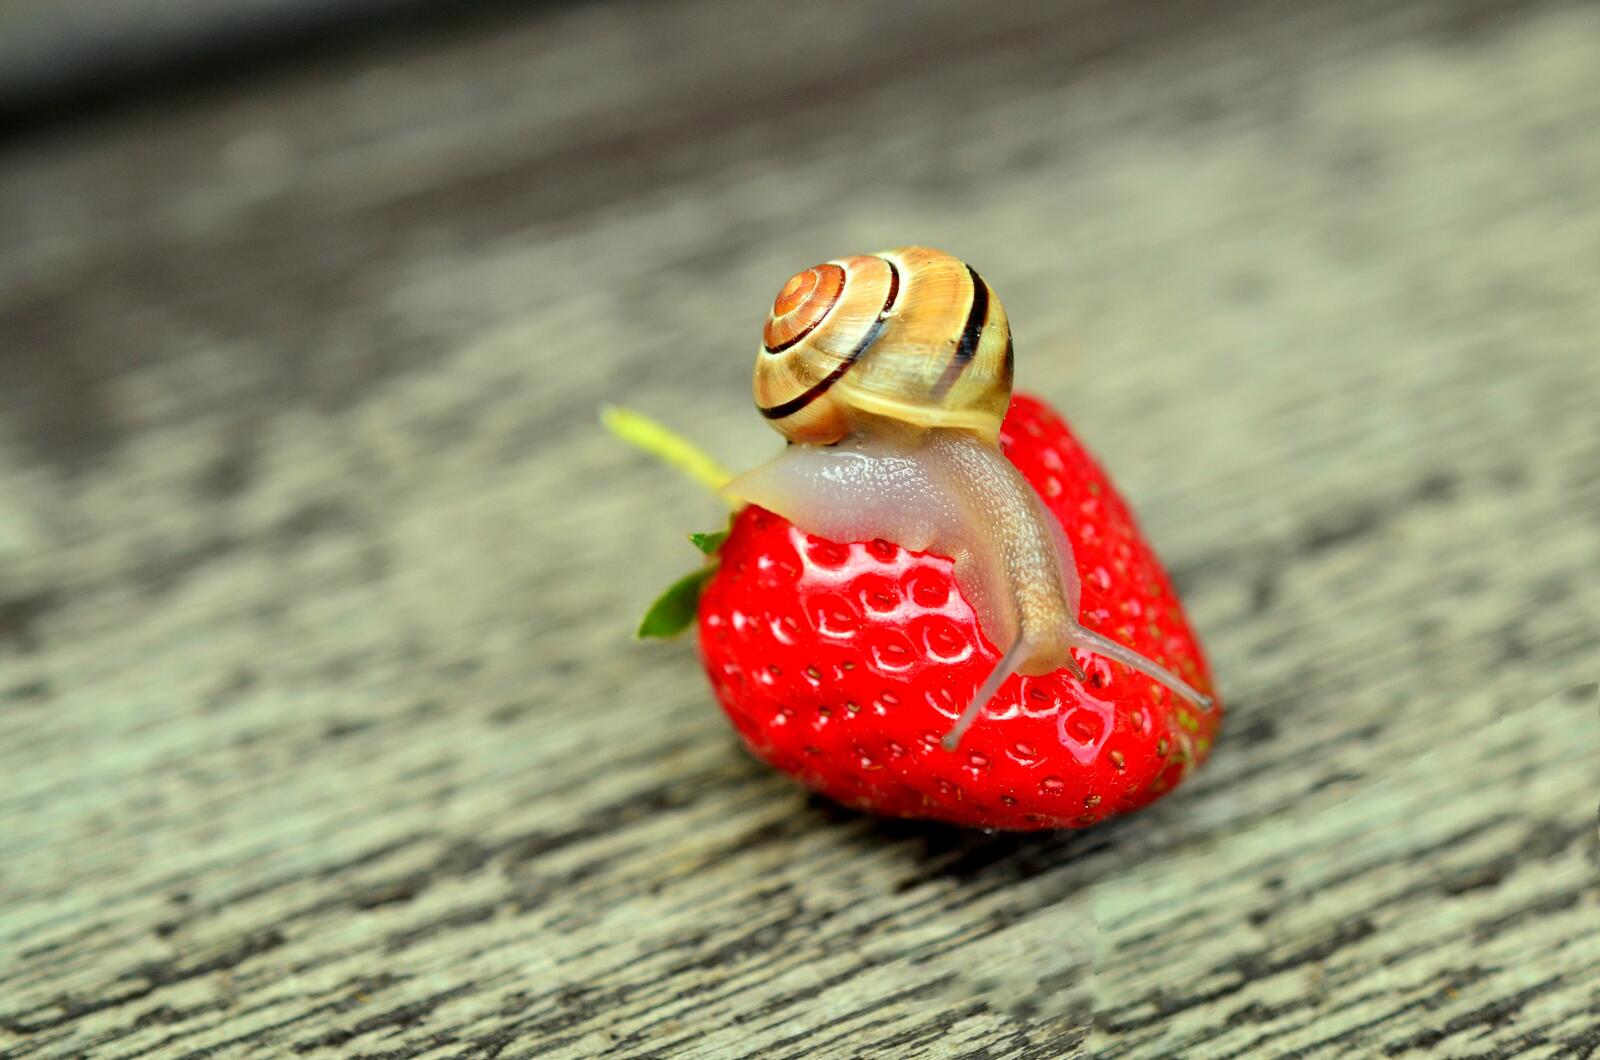 Free photo A little snail eats red strawberries.